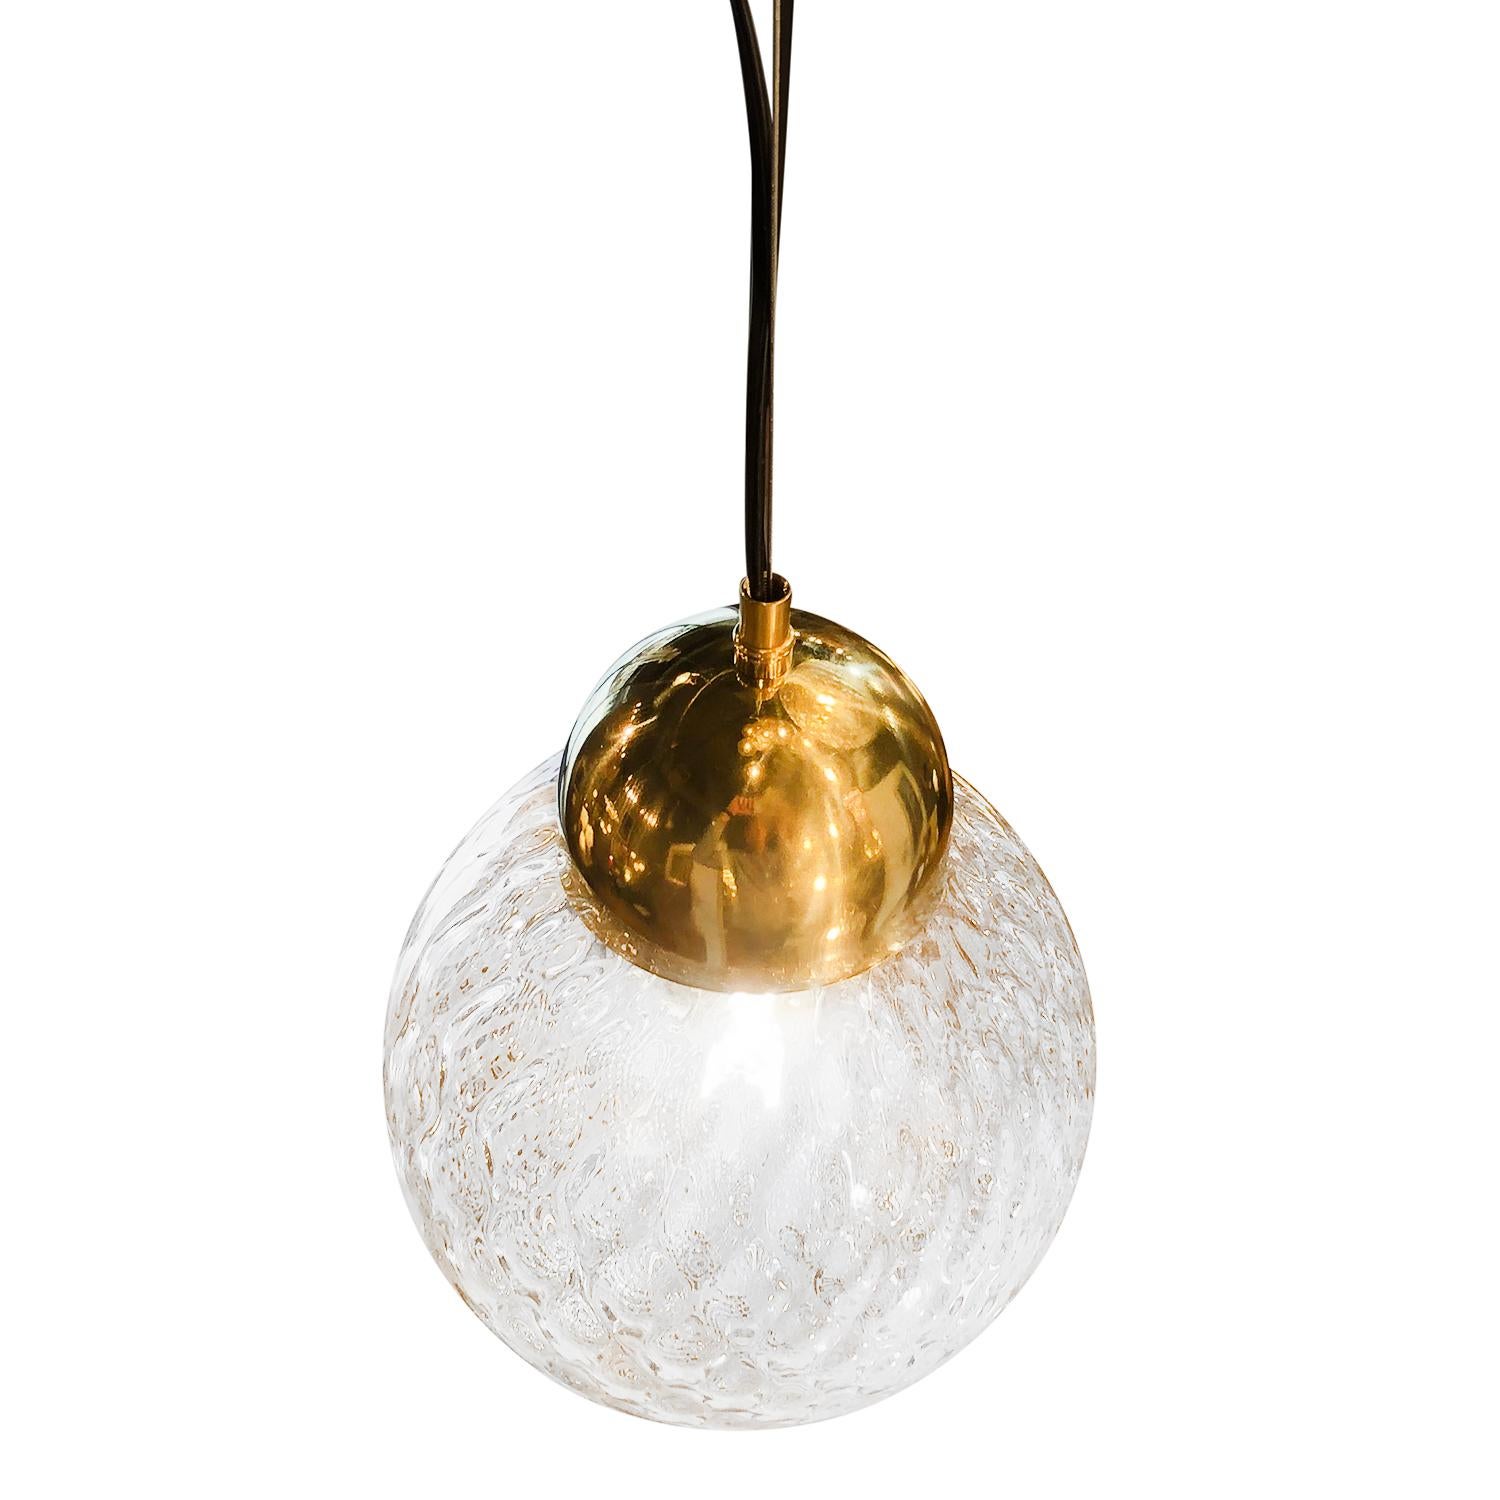 20th Century Italian Murano Glass Shade Chandelier -  Vintage Brass Pendant In Good Condition For Sale In West Palm Beach, FL